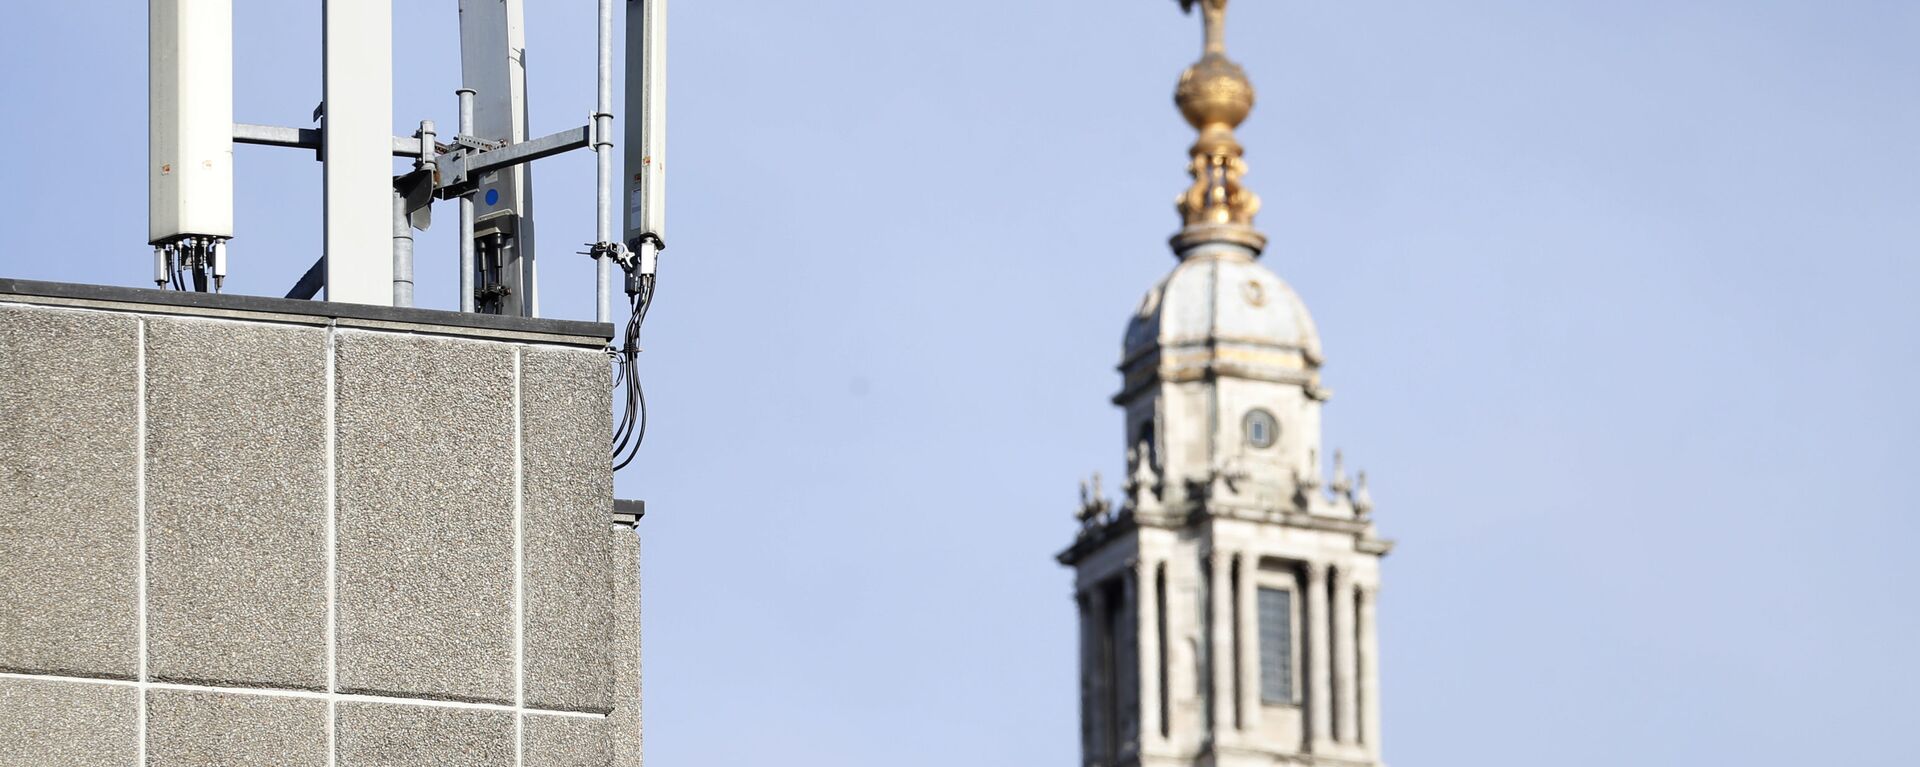 Mobile network phone masts are visible in front of St Paul's Cathedral in the City of London, Tuesday, Jan. 28, 2020. - Sputnik International, 1920, 01.07.2020